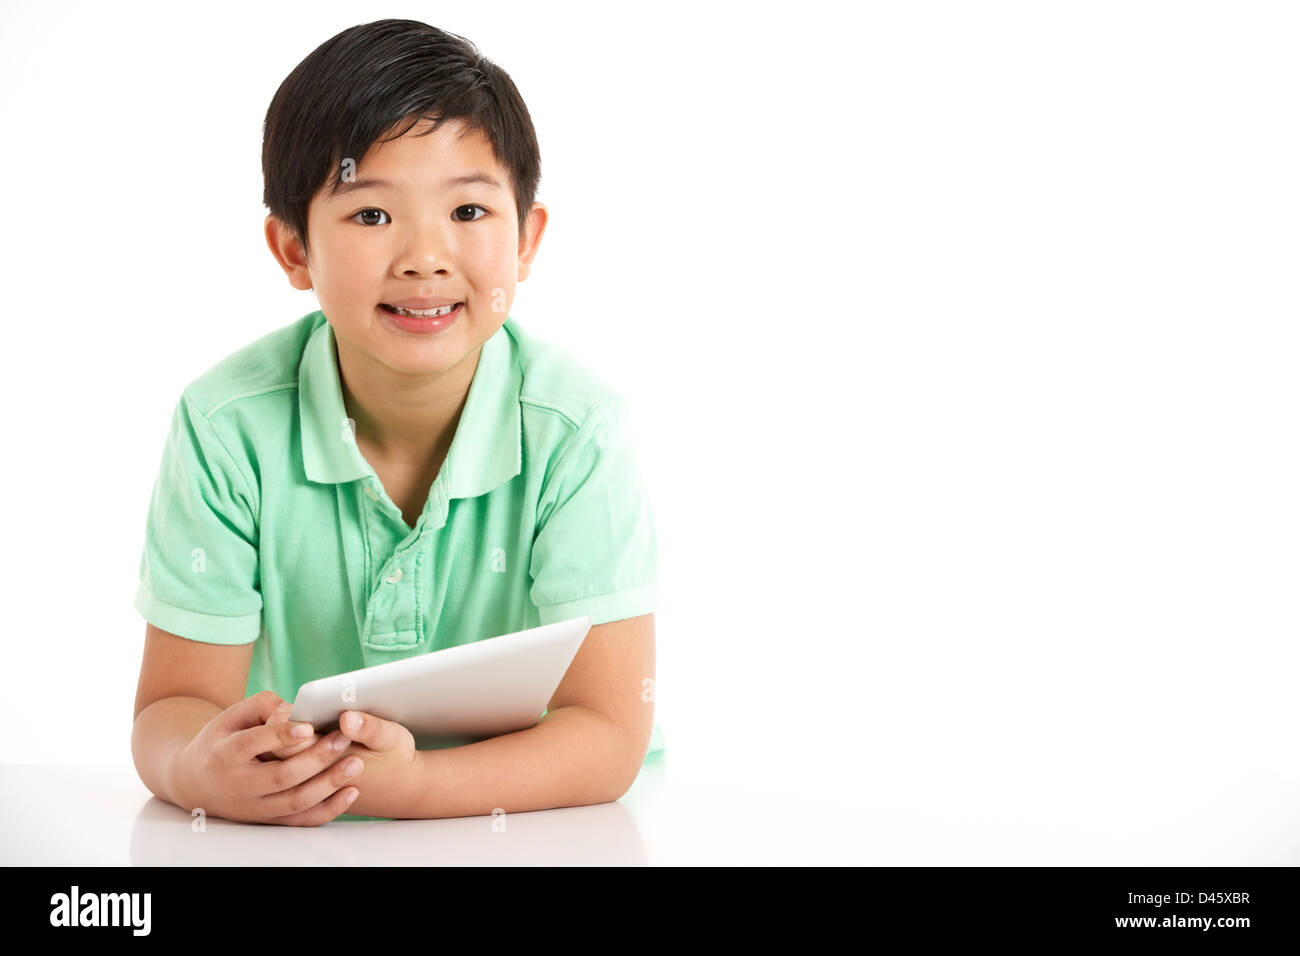 Studio Shot Of Chinese Boy With Digital Tablet Stock Photo